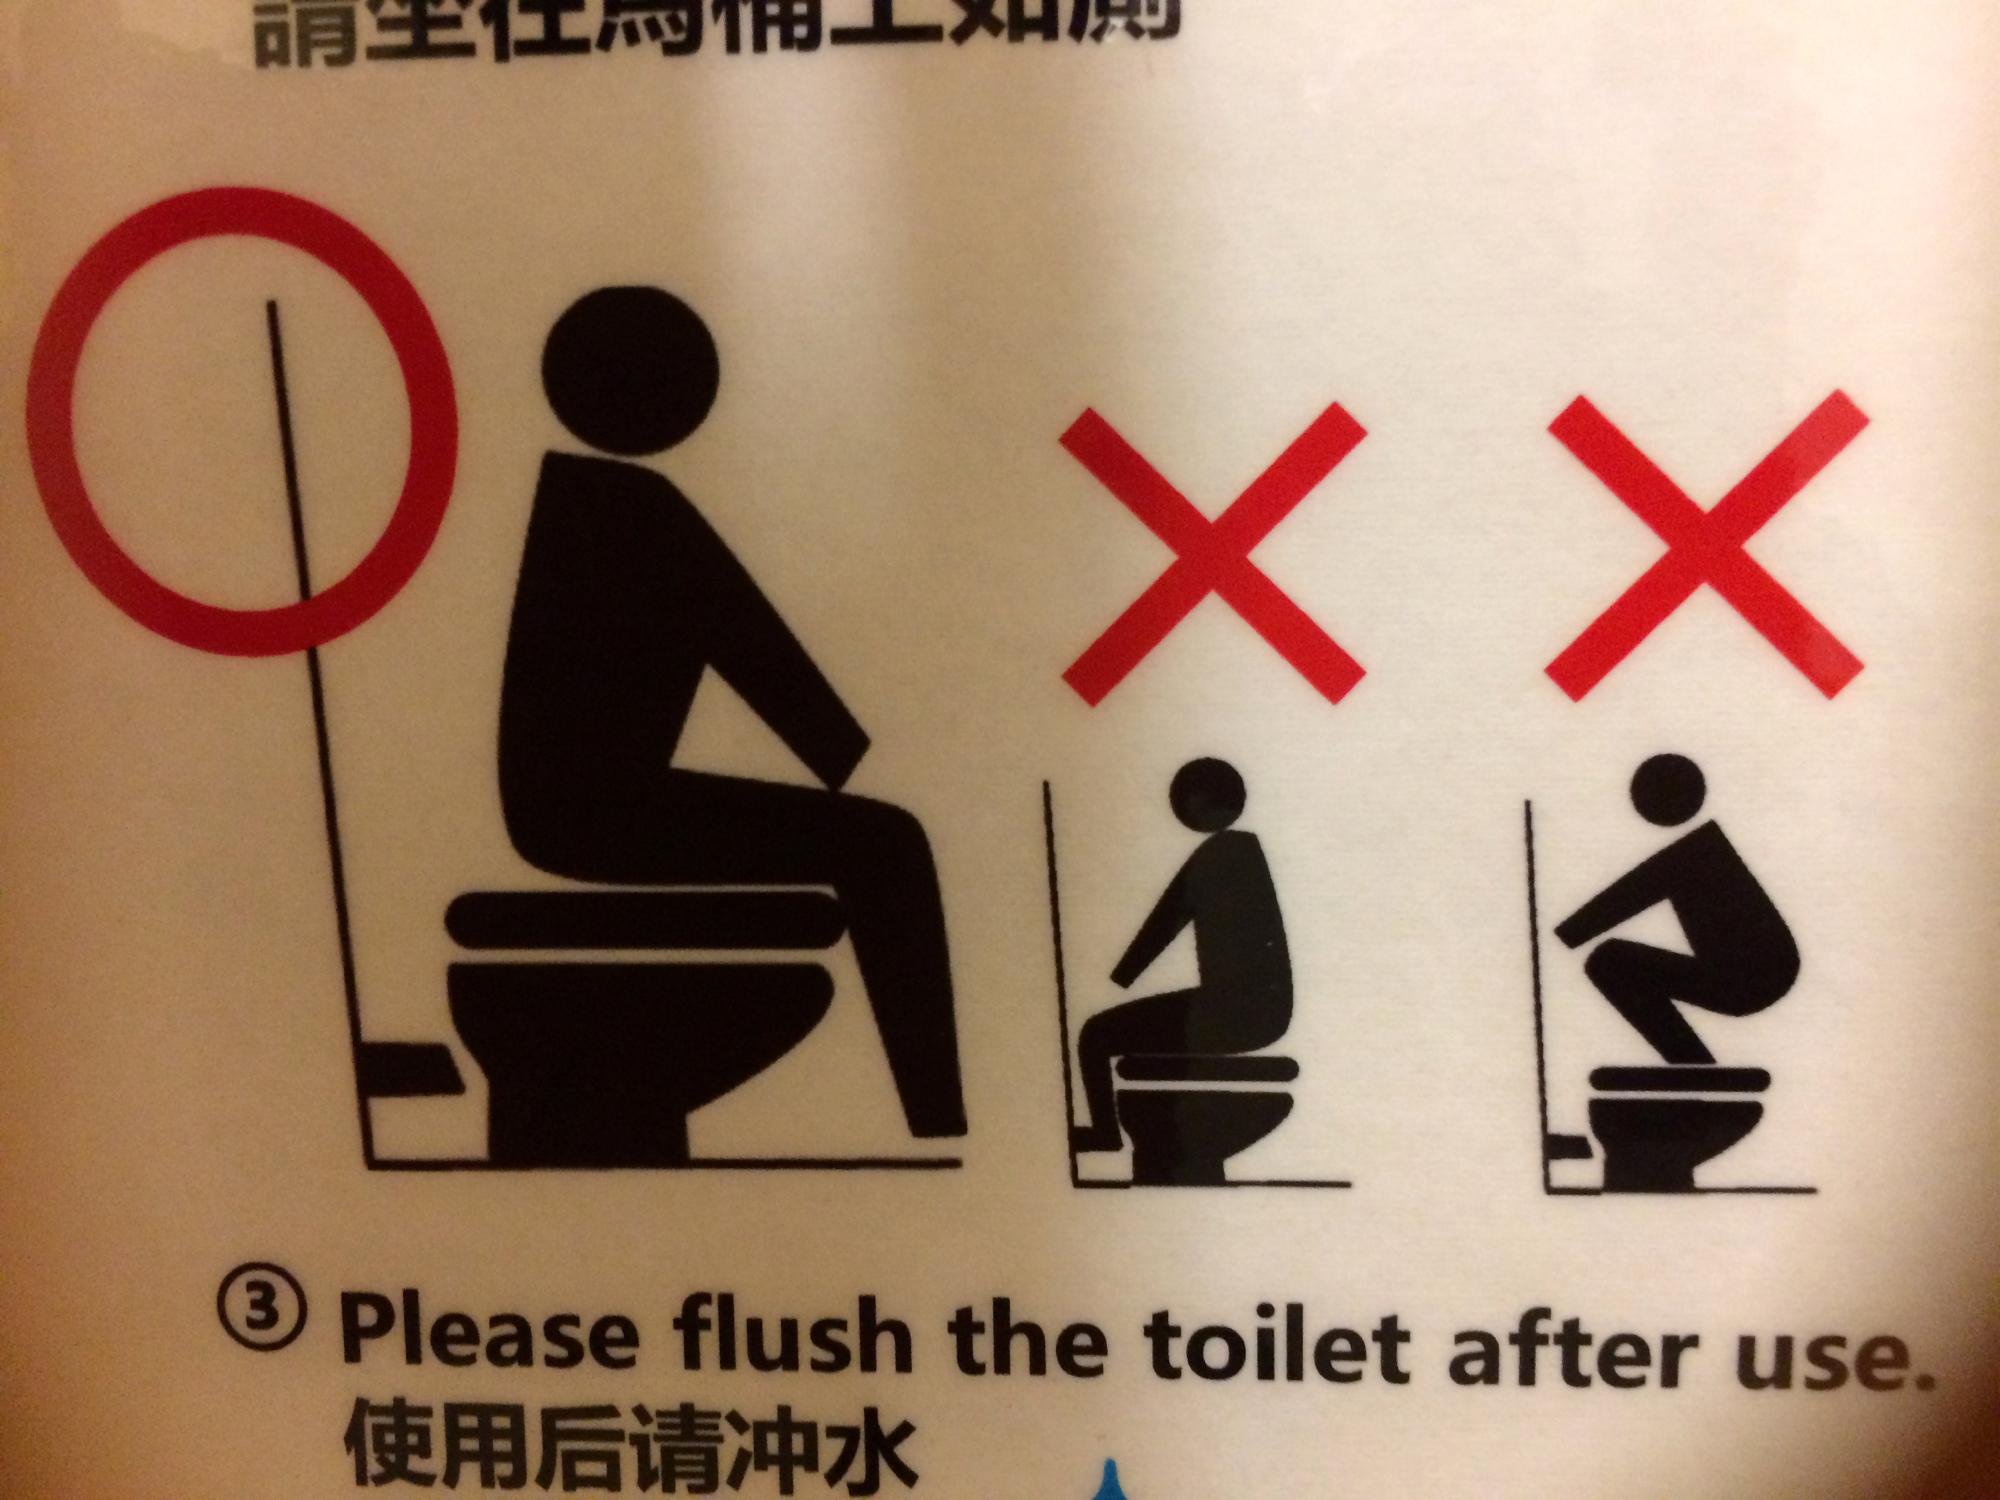 Signs Of Japan - Toilet Instructions